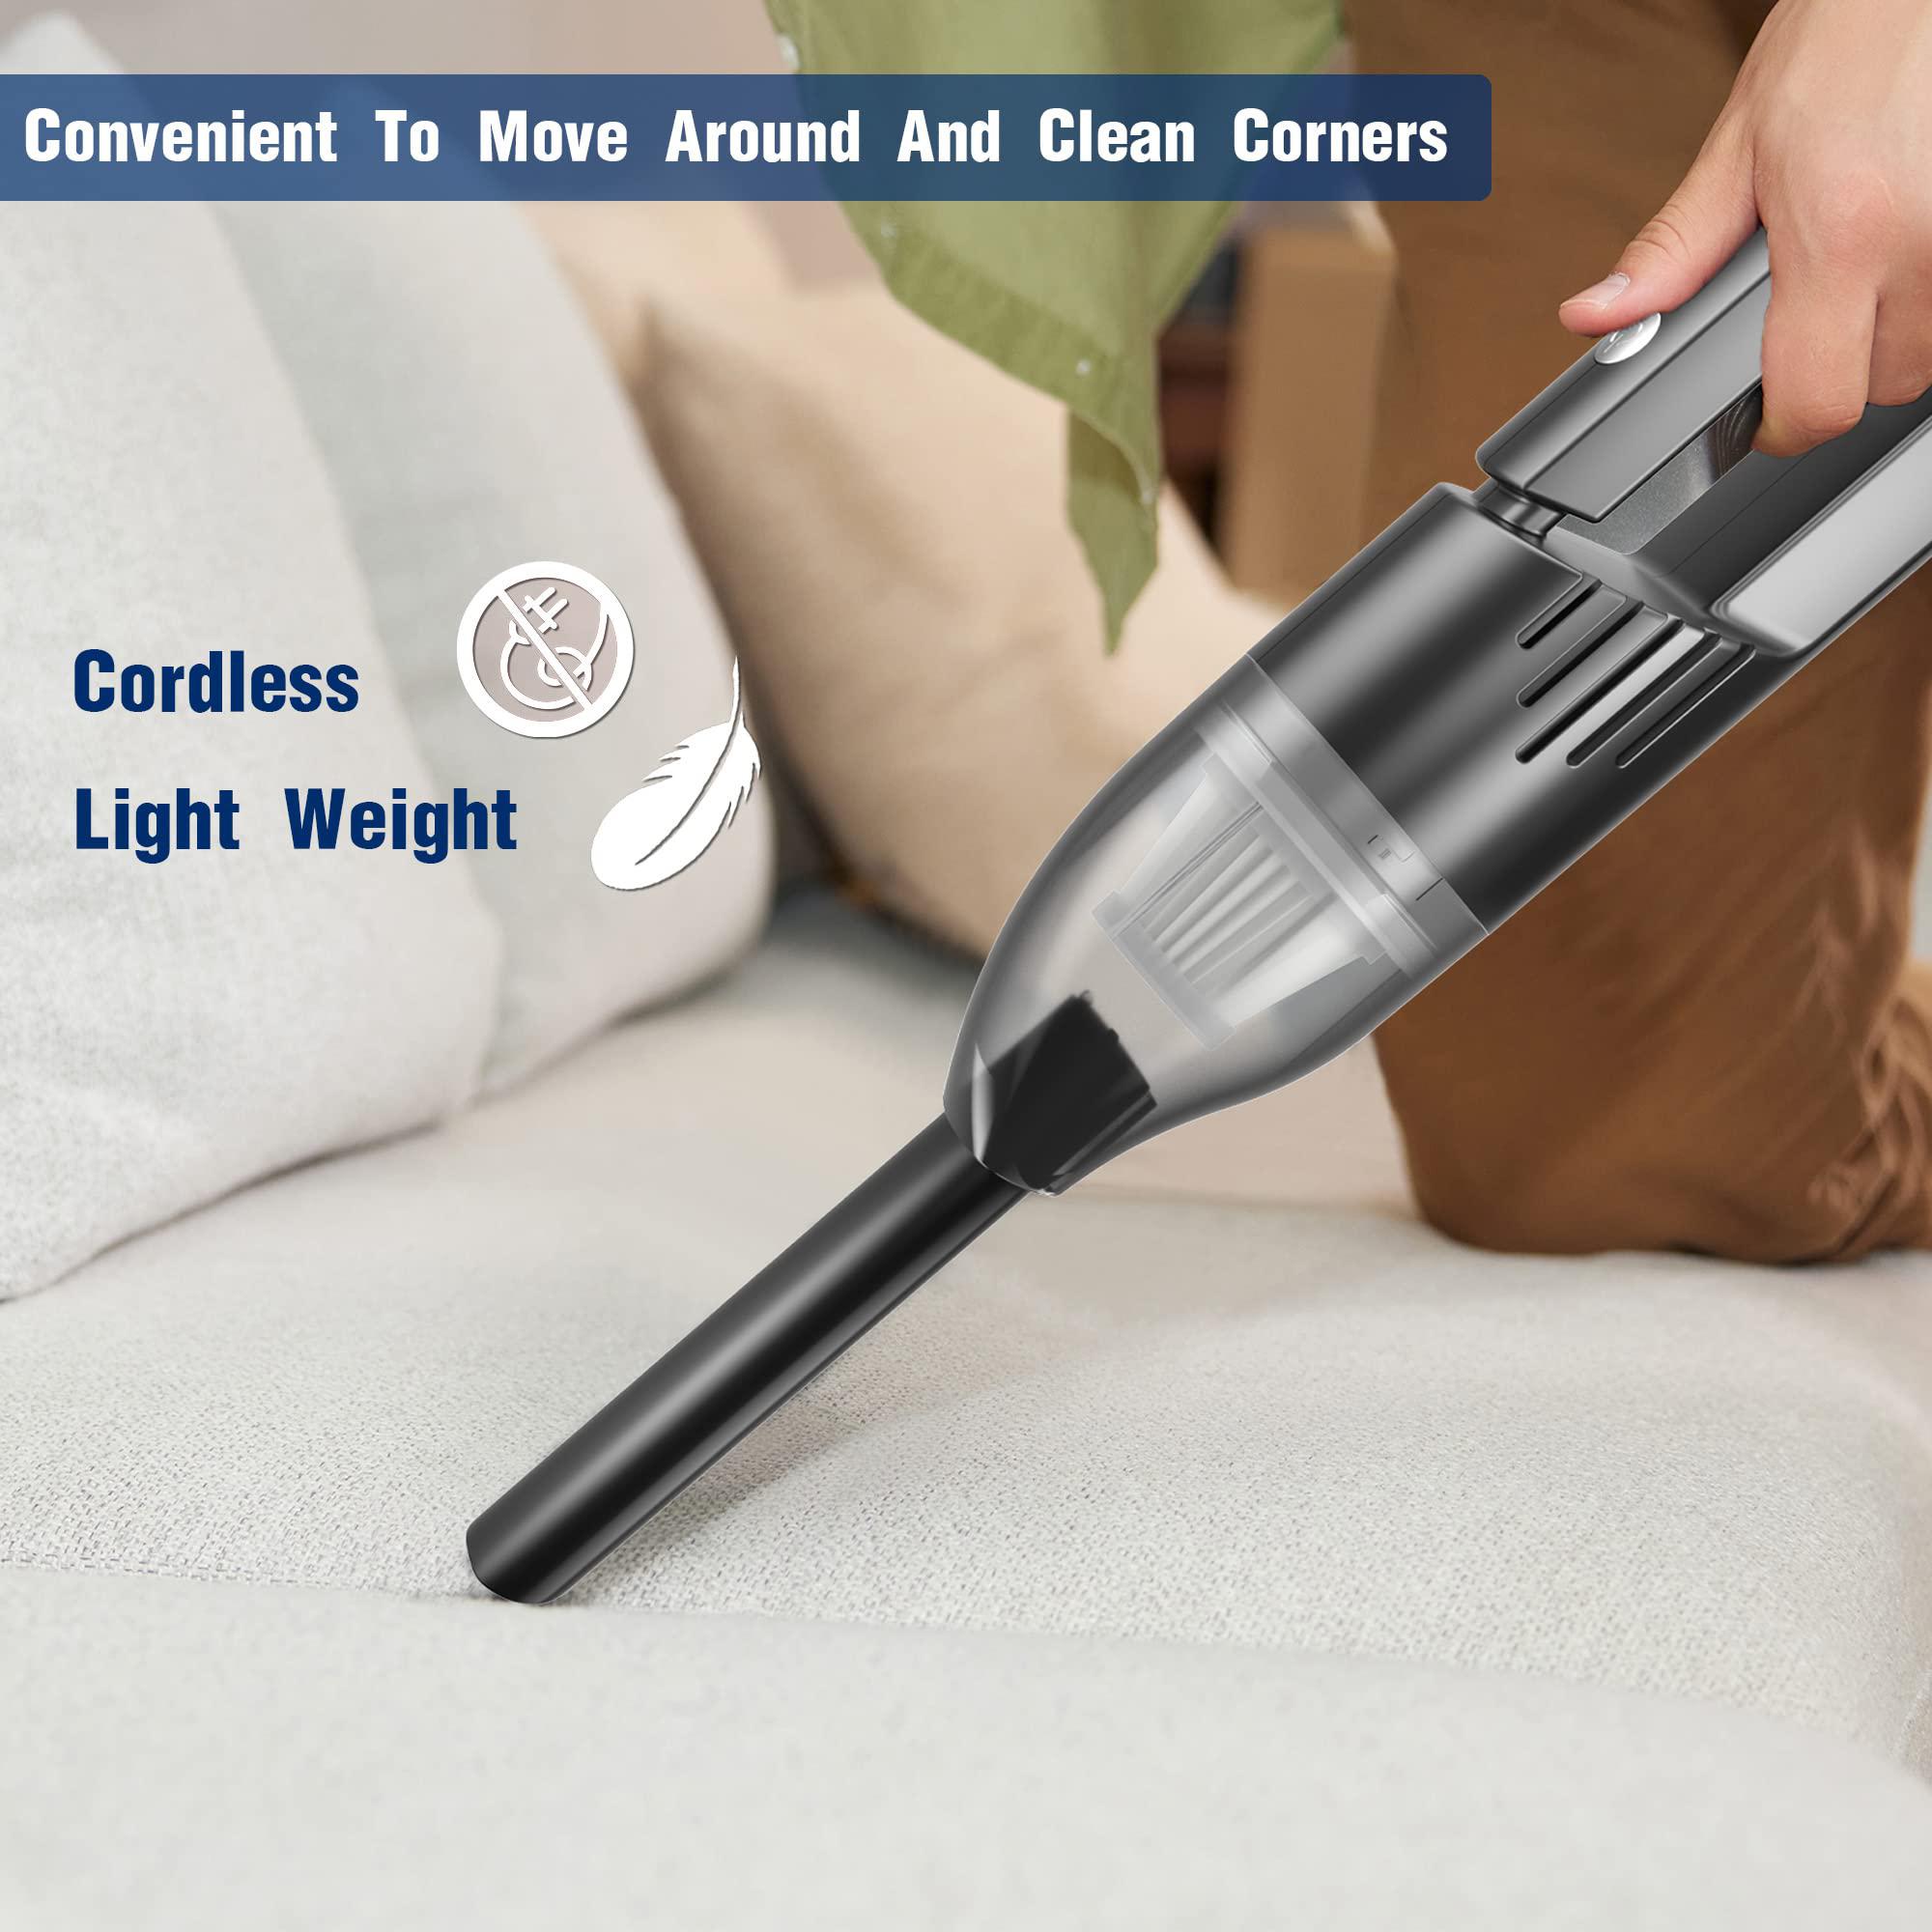 hikins handheld car vacuum cleaner cordless - portable powerful wet & dry mini vacuums, rechargeable strong suction hand vac 